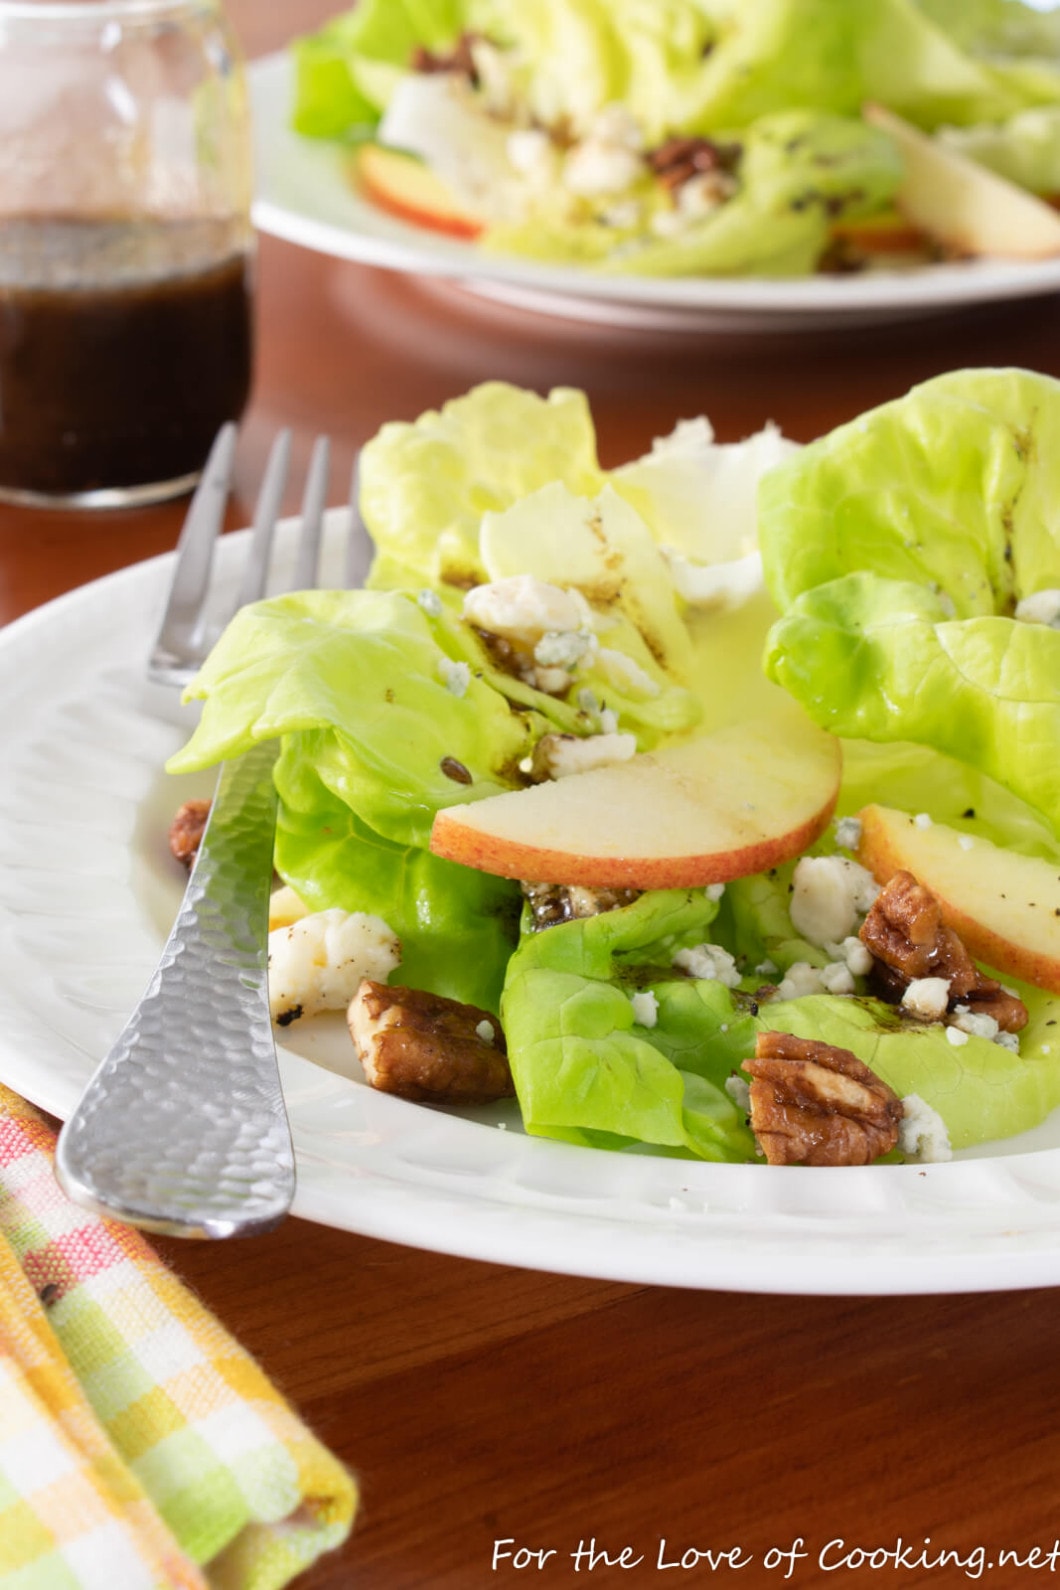 Butter Lettuce with Blue Cheese, Apples and Candied Pecans with a Balsamic Vinaigrette